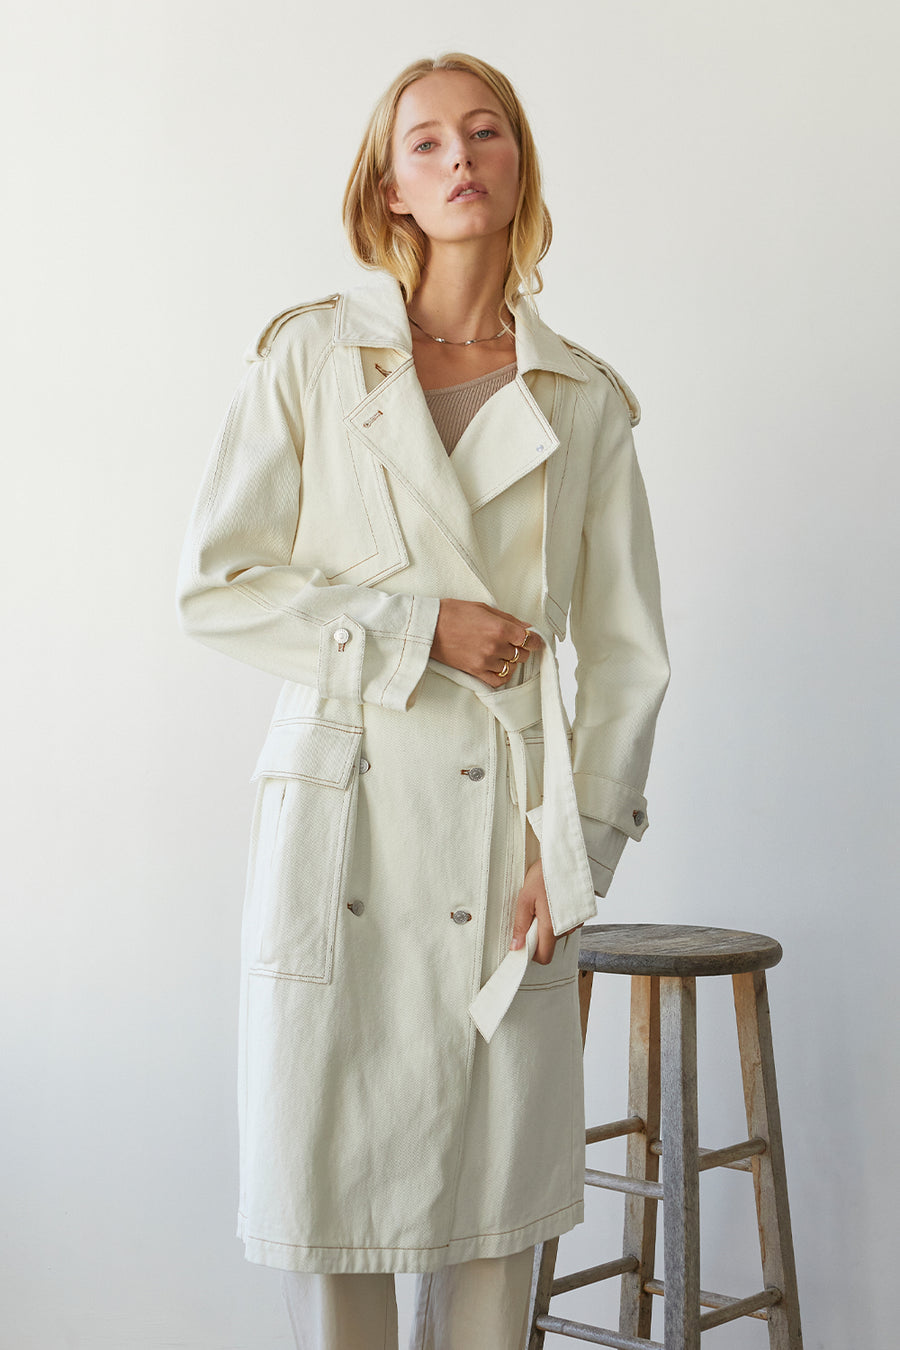 Trench Coat with front denim button closure, shoulder and sleeve flaps, and removable belt